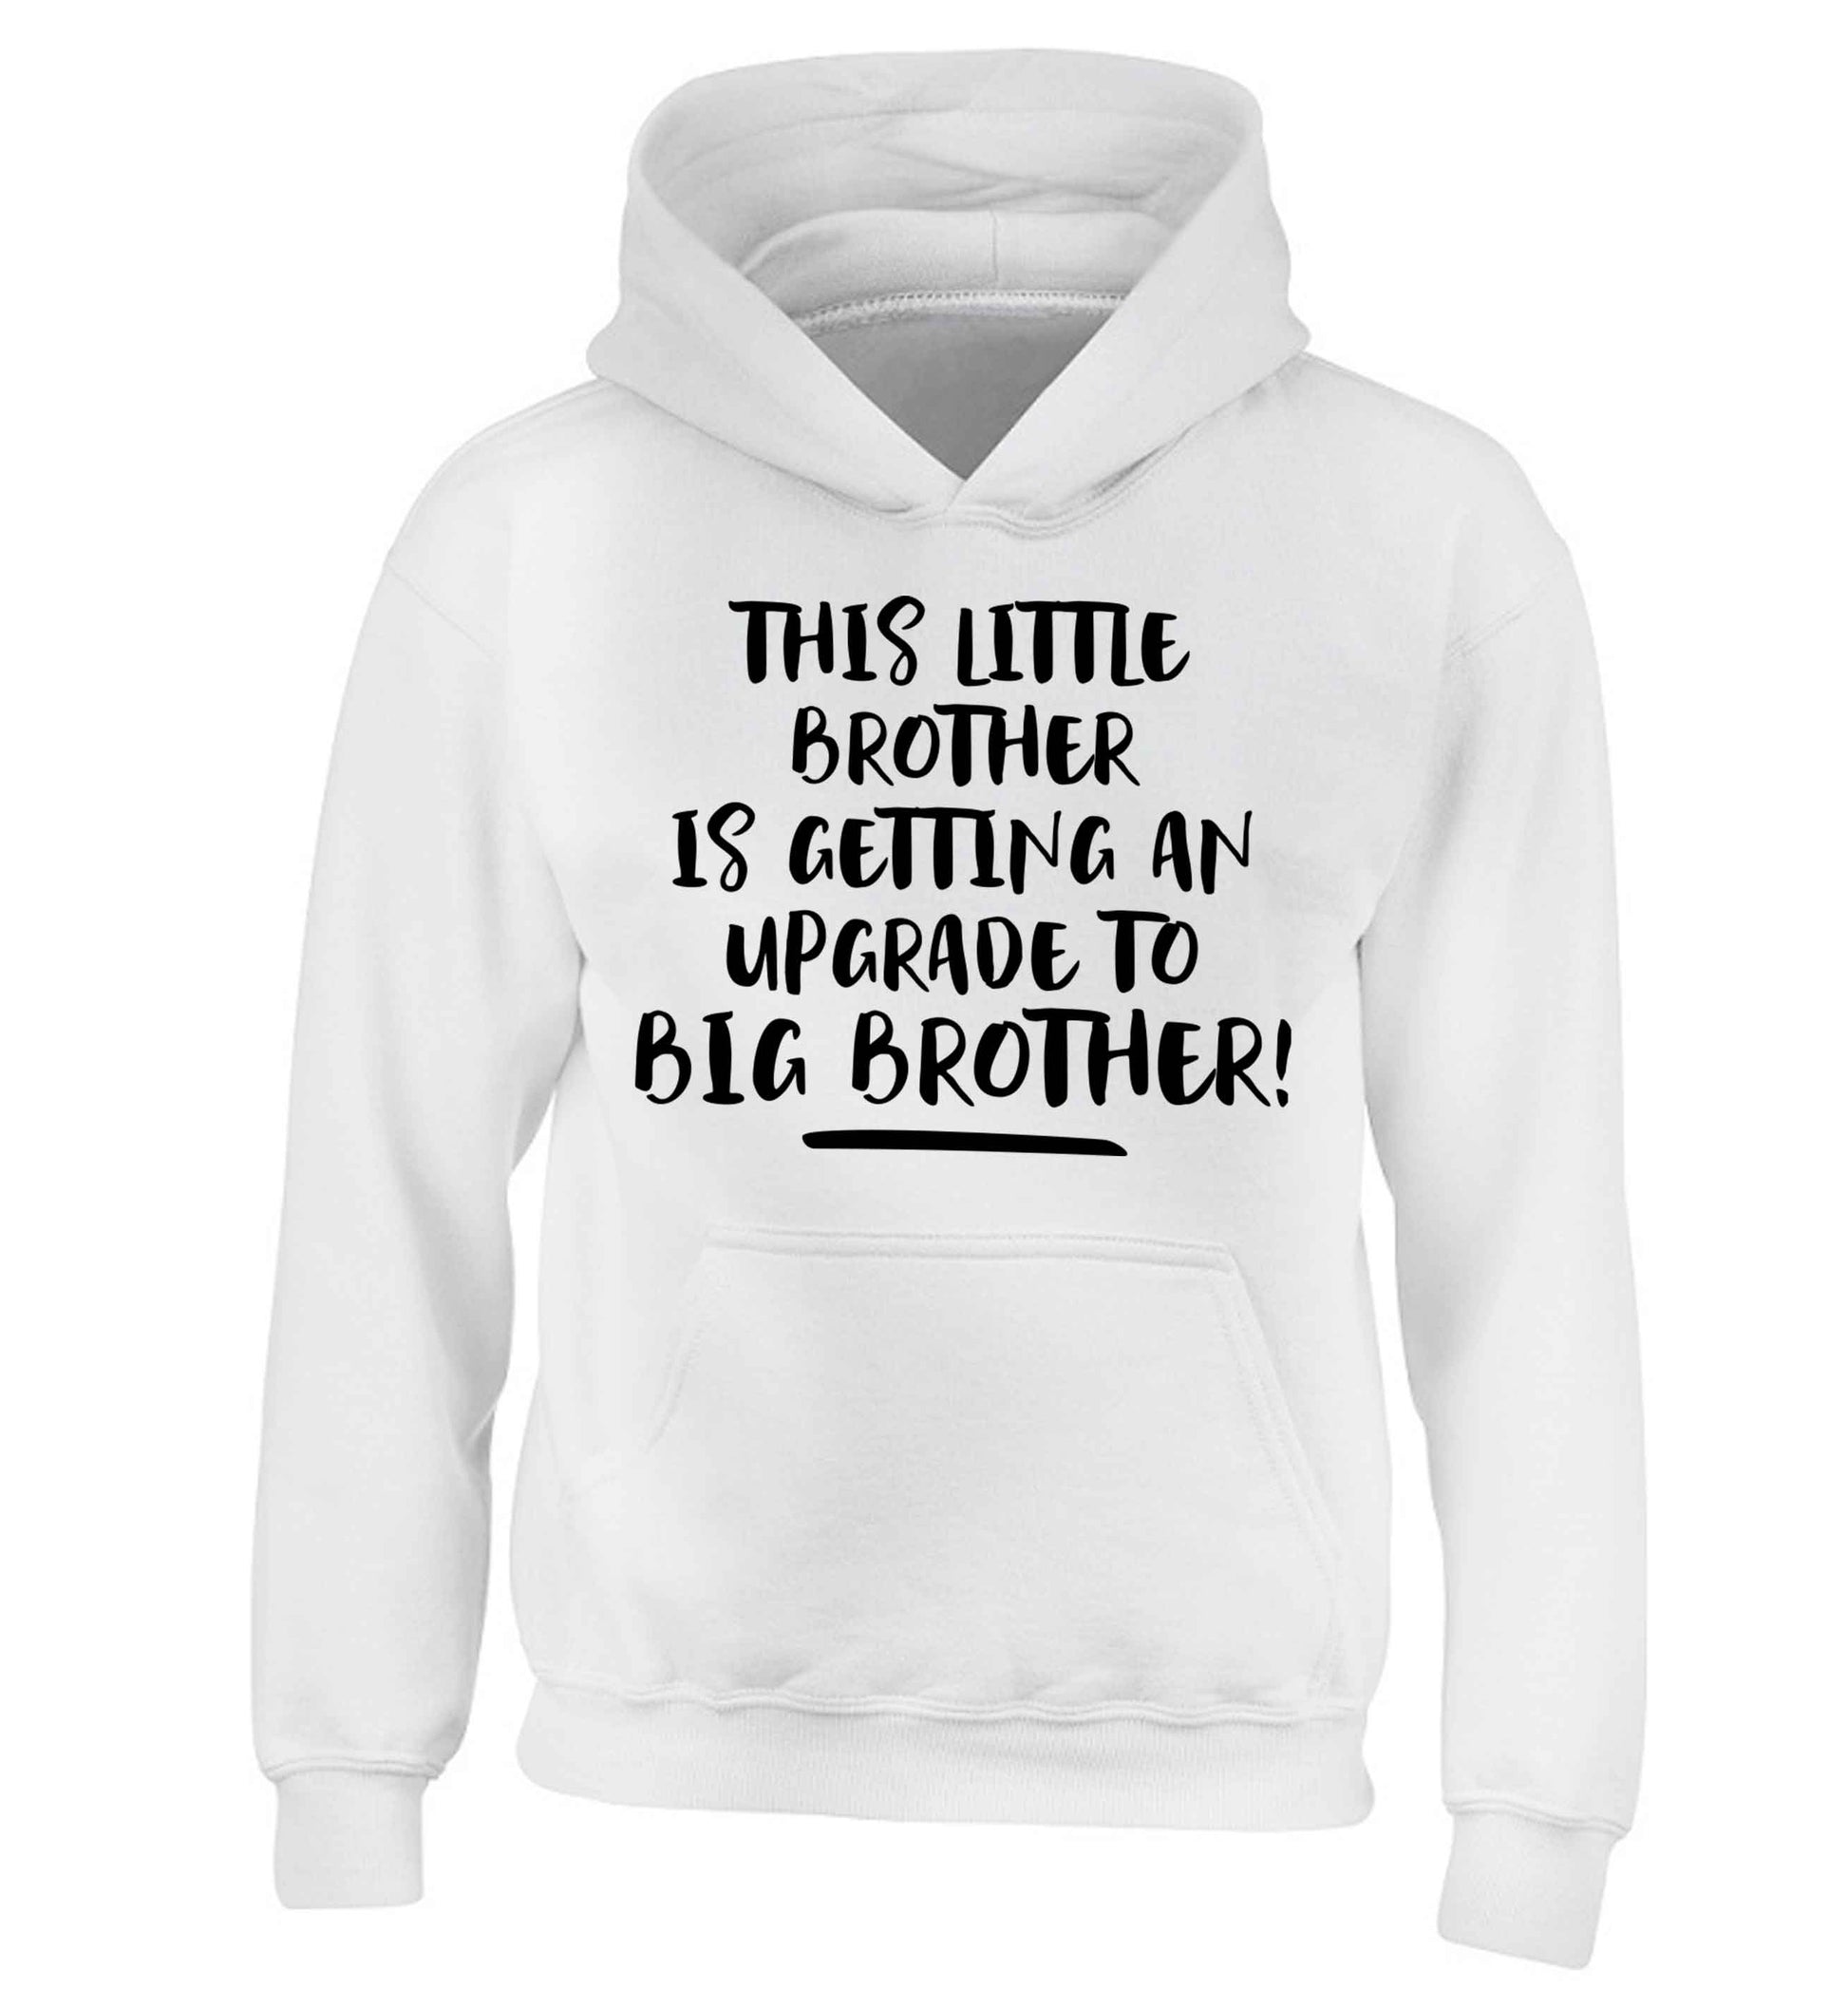 This little brother is getting an upgrade to big brother! children's white hoodie 12-13 Years